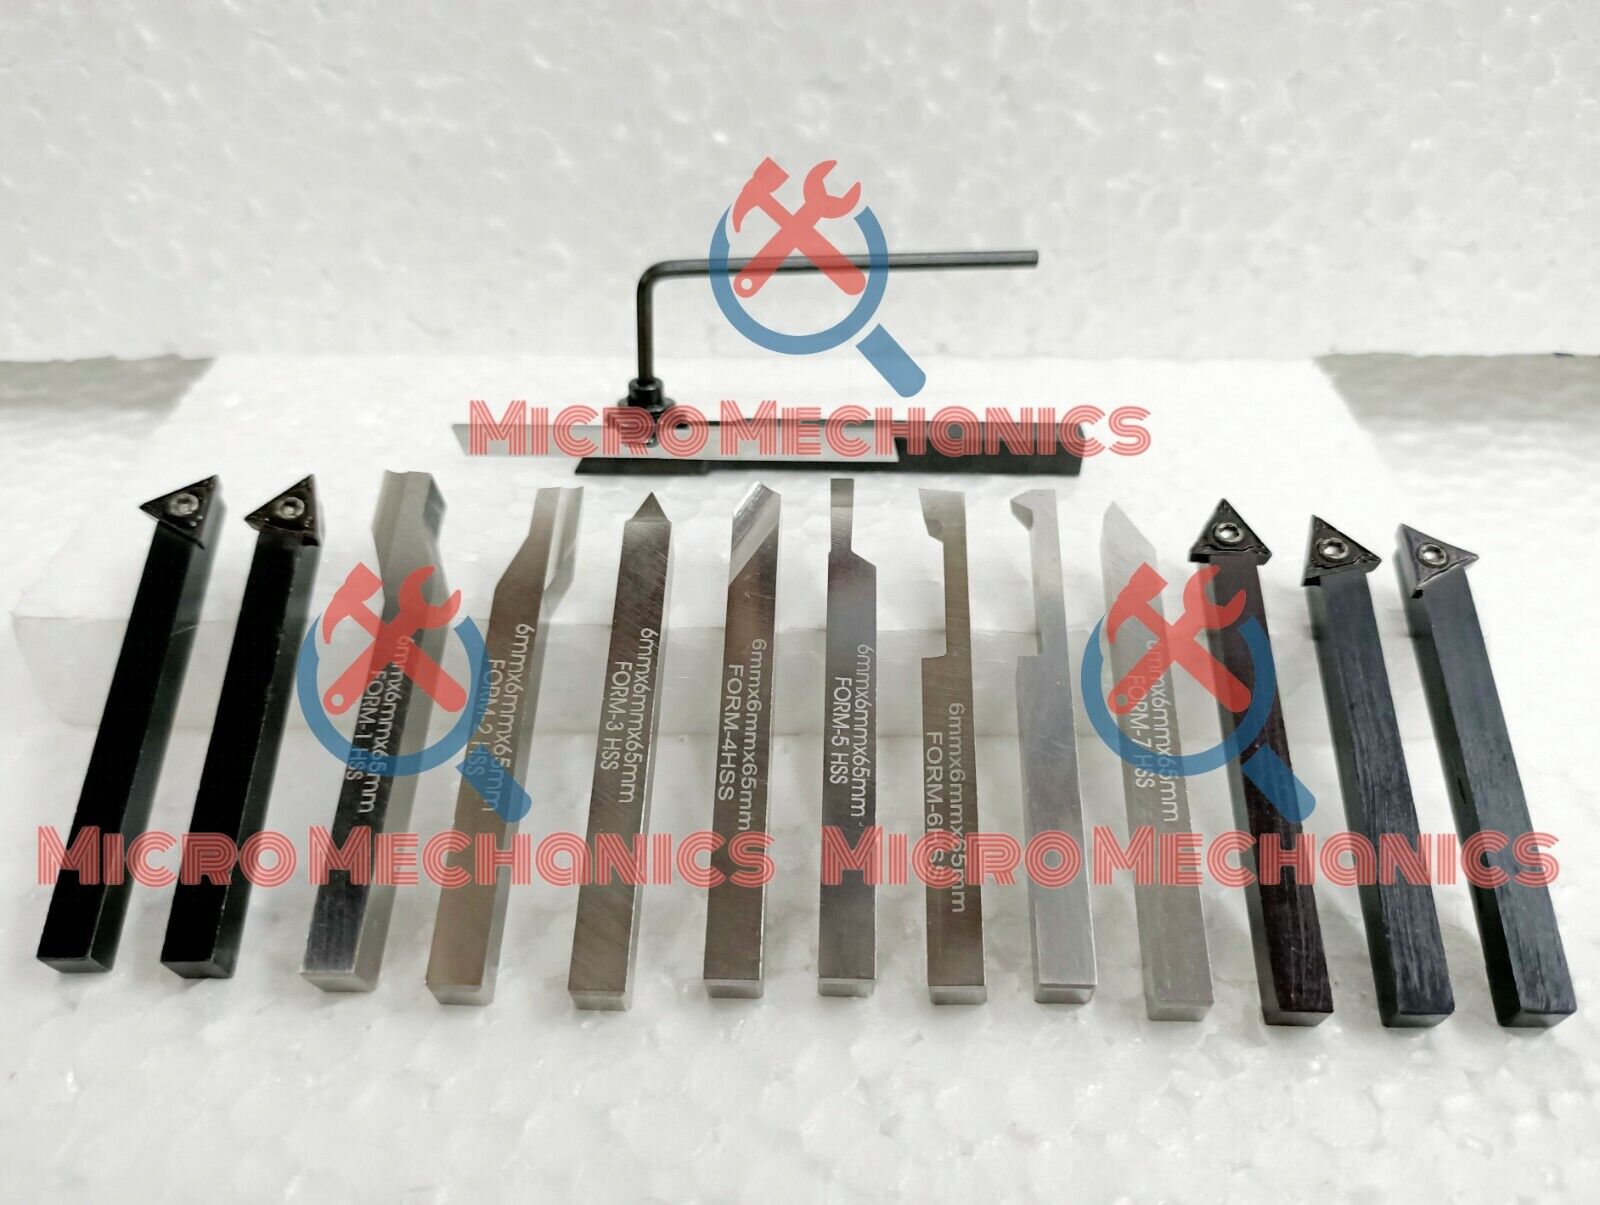 6MM HSS Lathe Form Tools 8 + Mini Lathe Parting Indexable Carbide Insert Tools